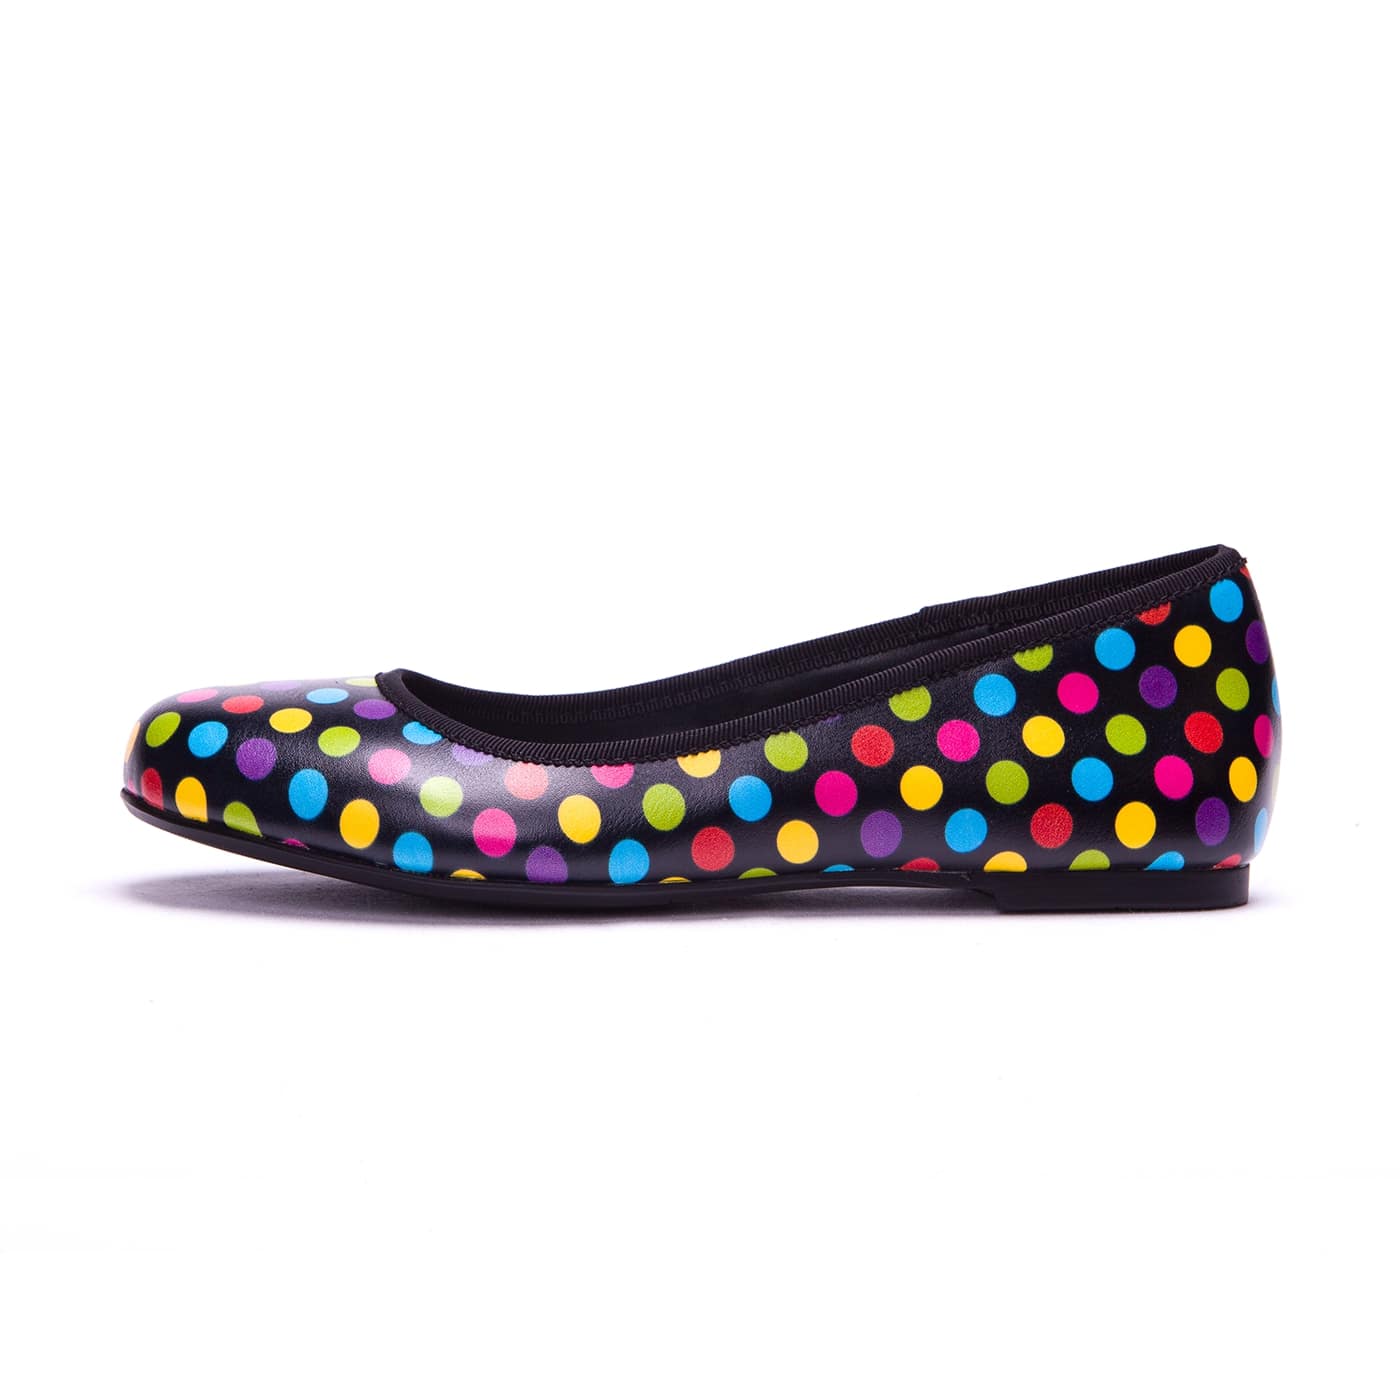 Confetti Ballet Flats by RainbowsAndFairies.com (Coloured Polka Dots - Multi Coloured - Rainbow - Quirky Shoes - Slip Ons - Comfy Flats) - SKU: FW_BALET_CONFT_ORG - Pic 03